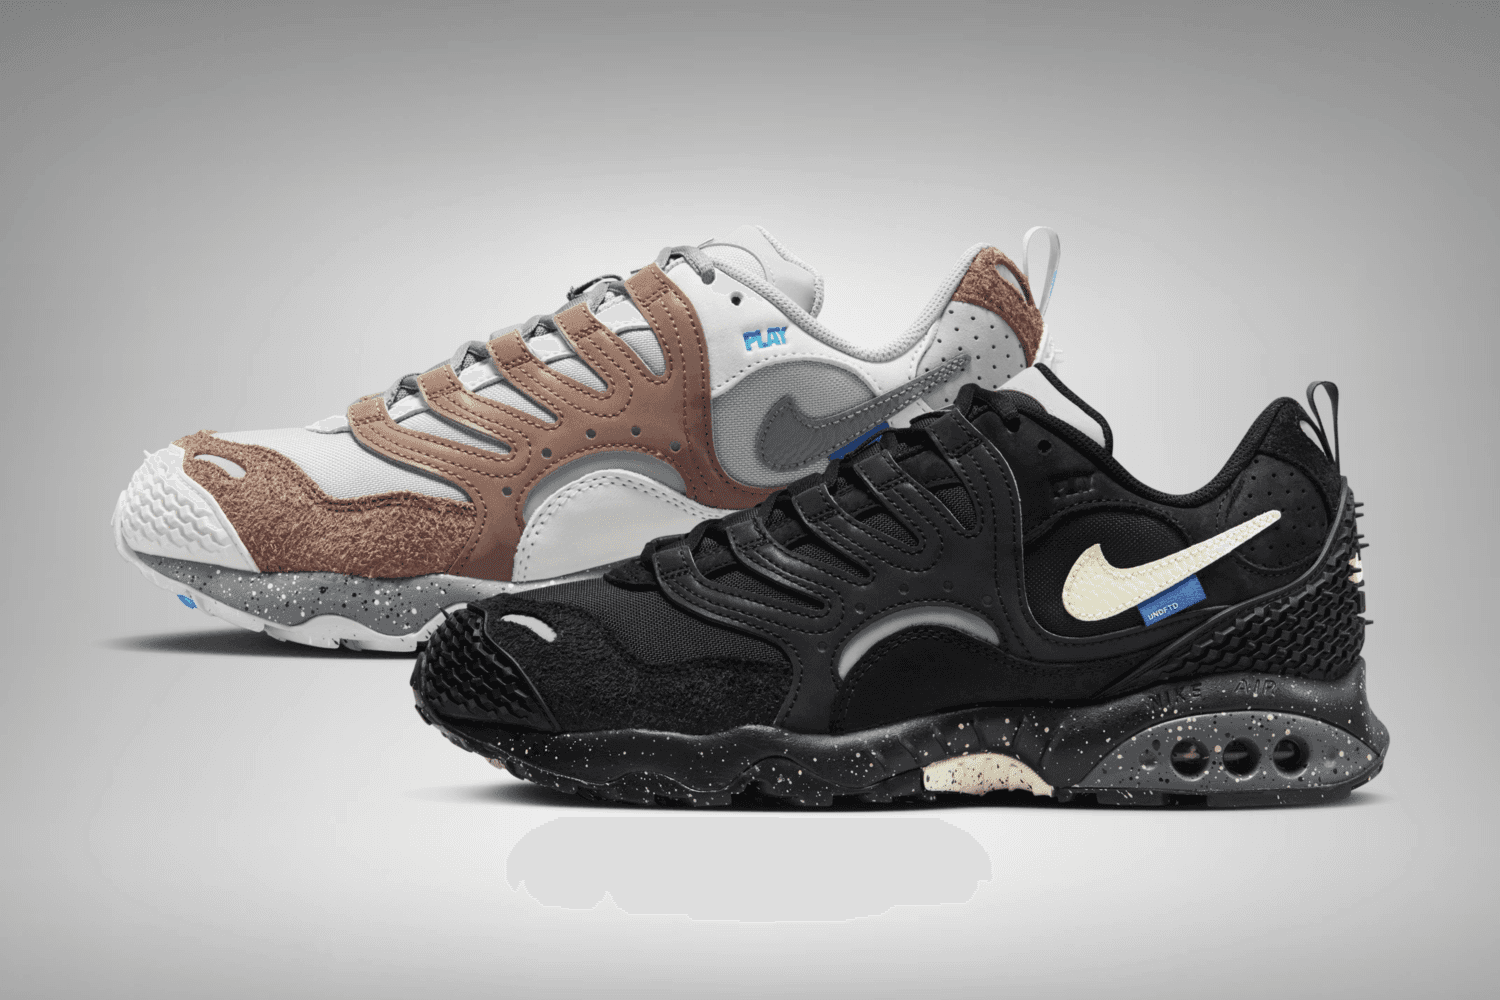 Official images from the UNDEFEATED x Nike Air Terra Humara collab